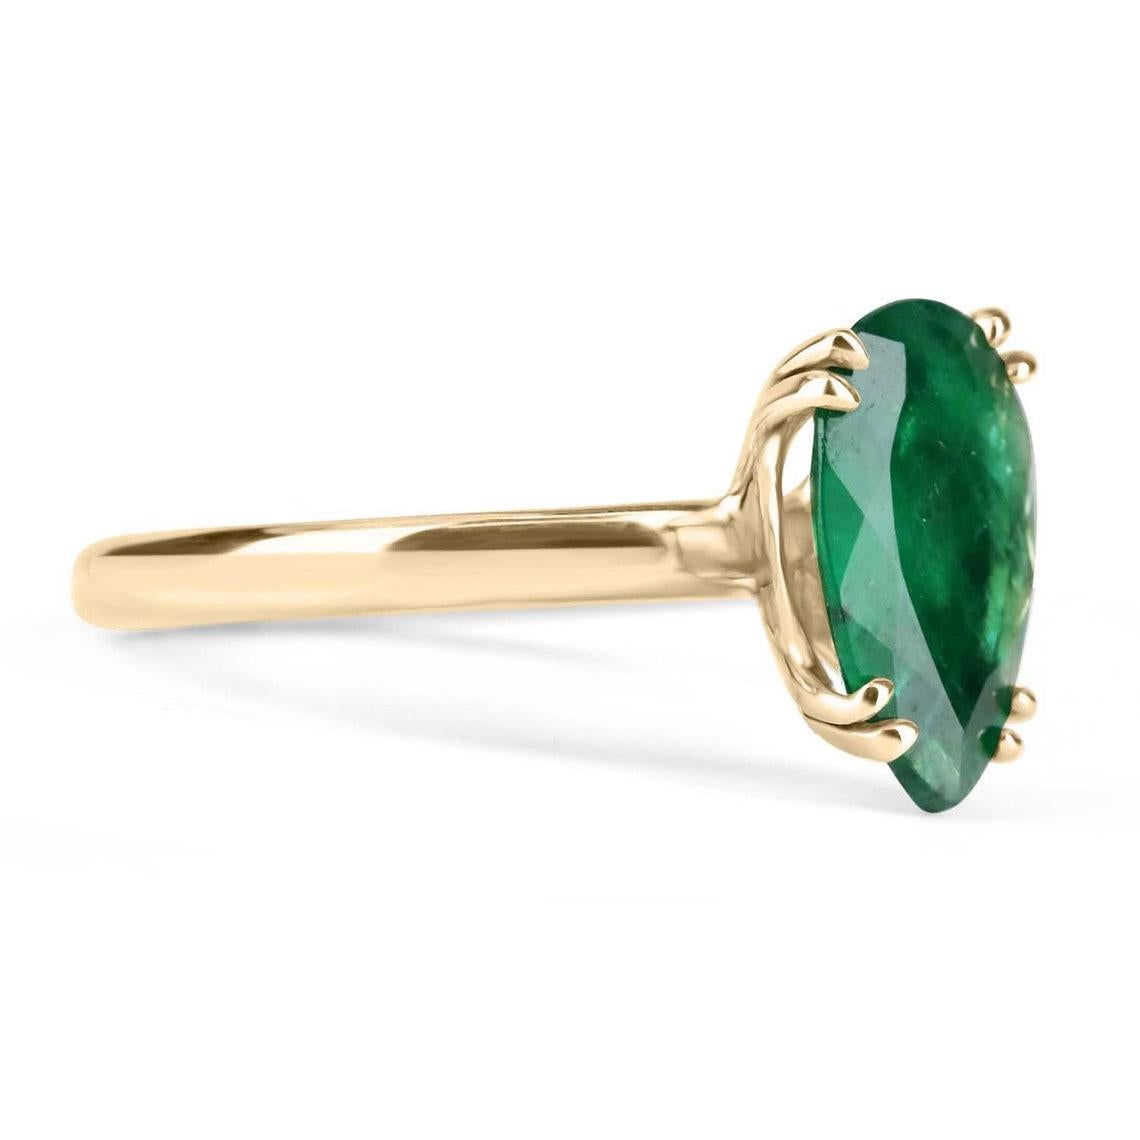 Displayed is a custom emerald solitaire pear-cut engagement/right-hand ring in 14K yellow gold. This gorgeous solitaire ring carries a 2.10-carat emerald in a 4, double prong setting. The emerald has very good clarity with minor flaws that are